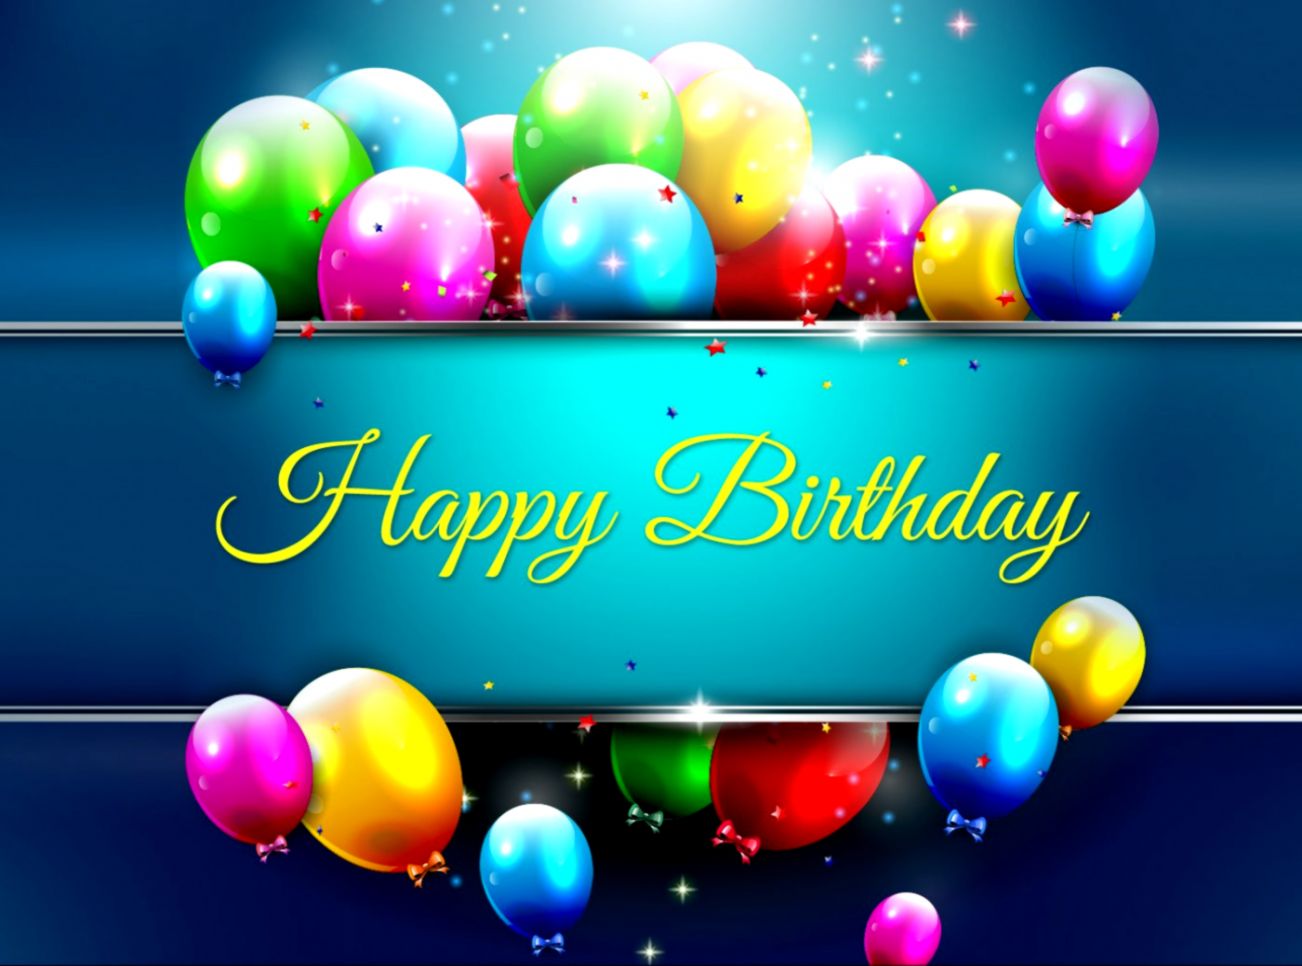 Free Download Happy Birthday Images For Him Hd Wallpaper Styles Wallpapers 1302x966 For Your Desktop Mobile Tablet Explore 52 Wallpapers Of Happy Birthday Free Birthday Wallpaper Birthday Wallpaper Background